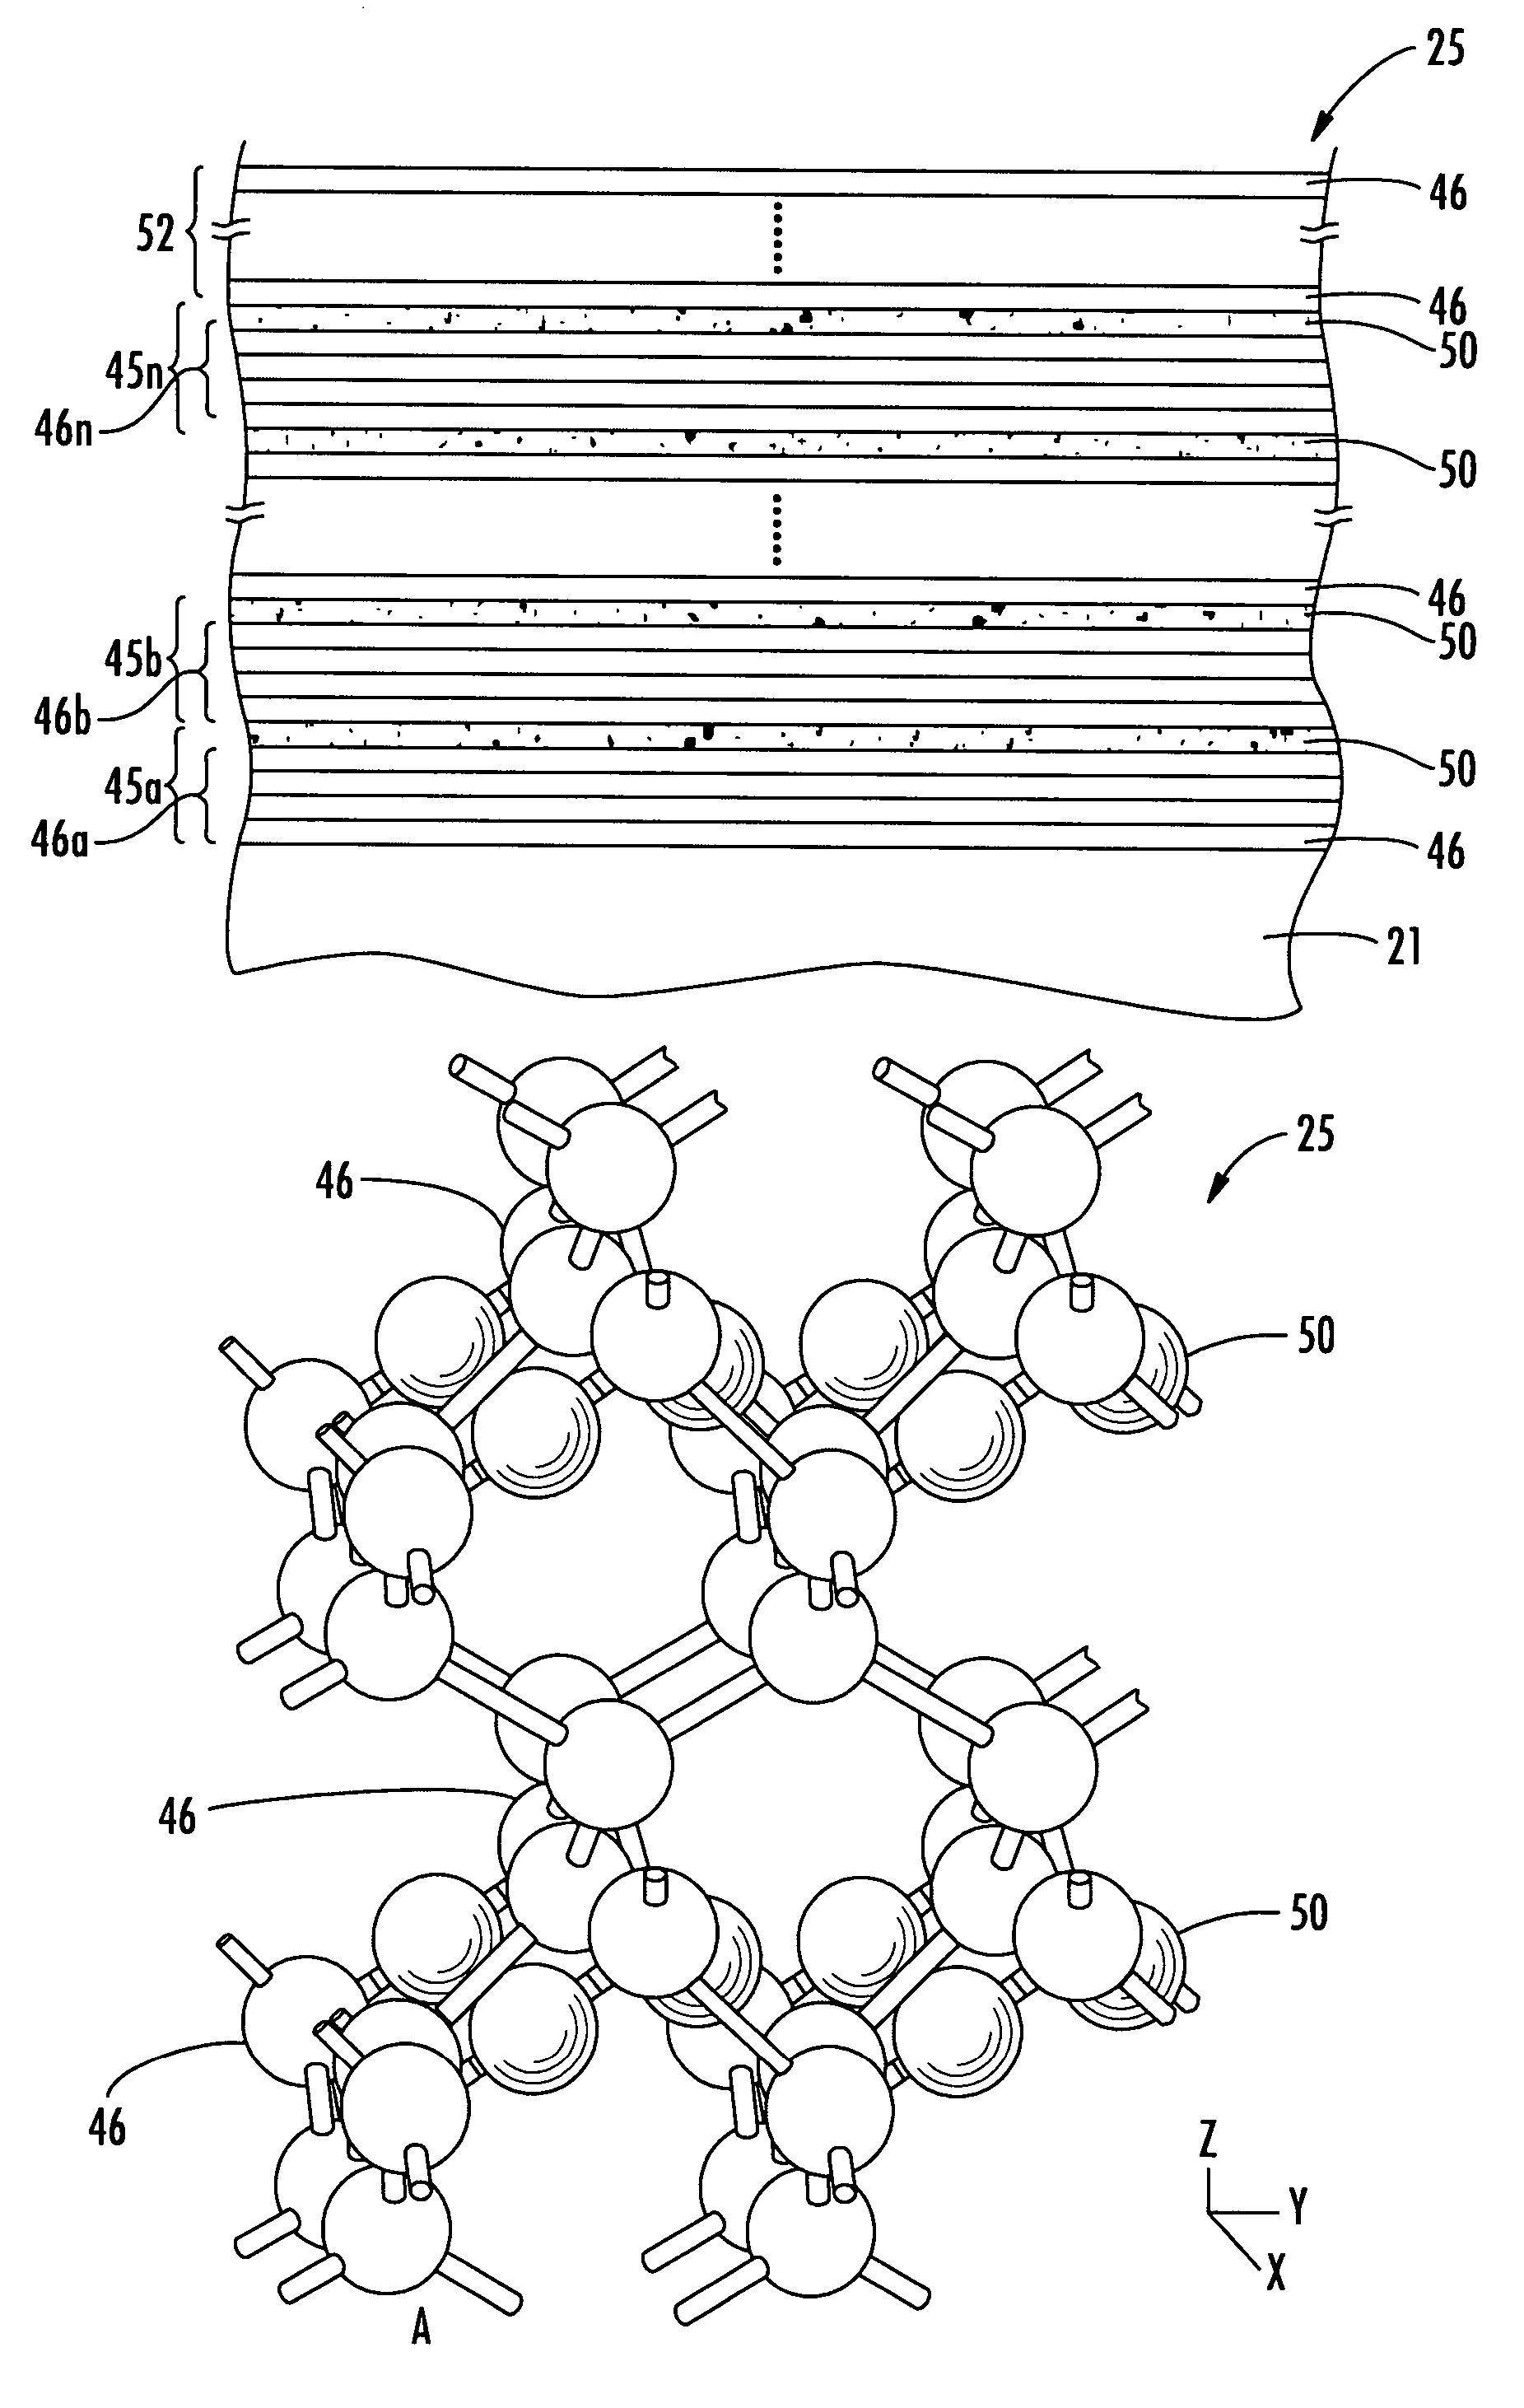 Method for making an electronic device including a poled superlattice having a net electrical dipole moment